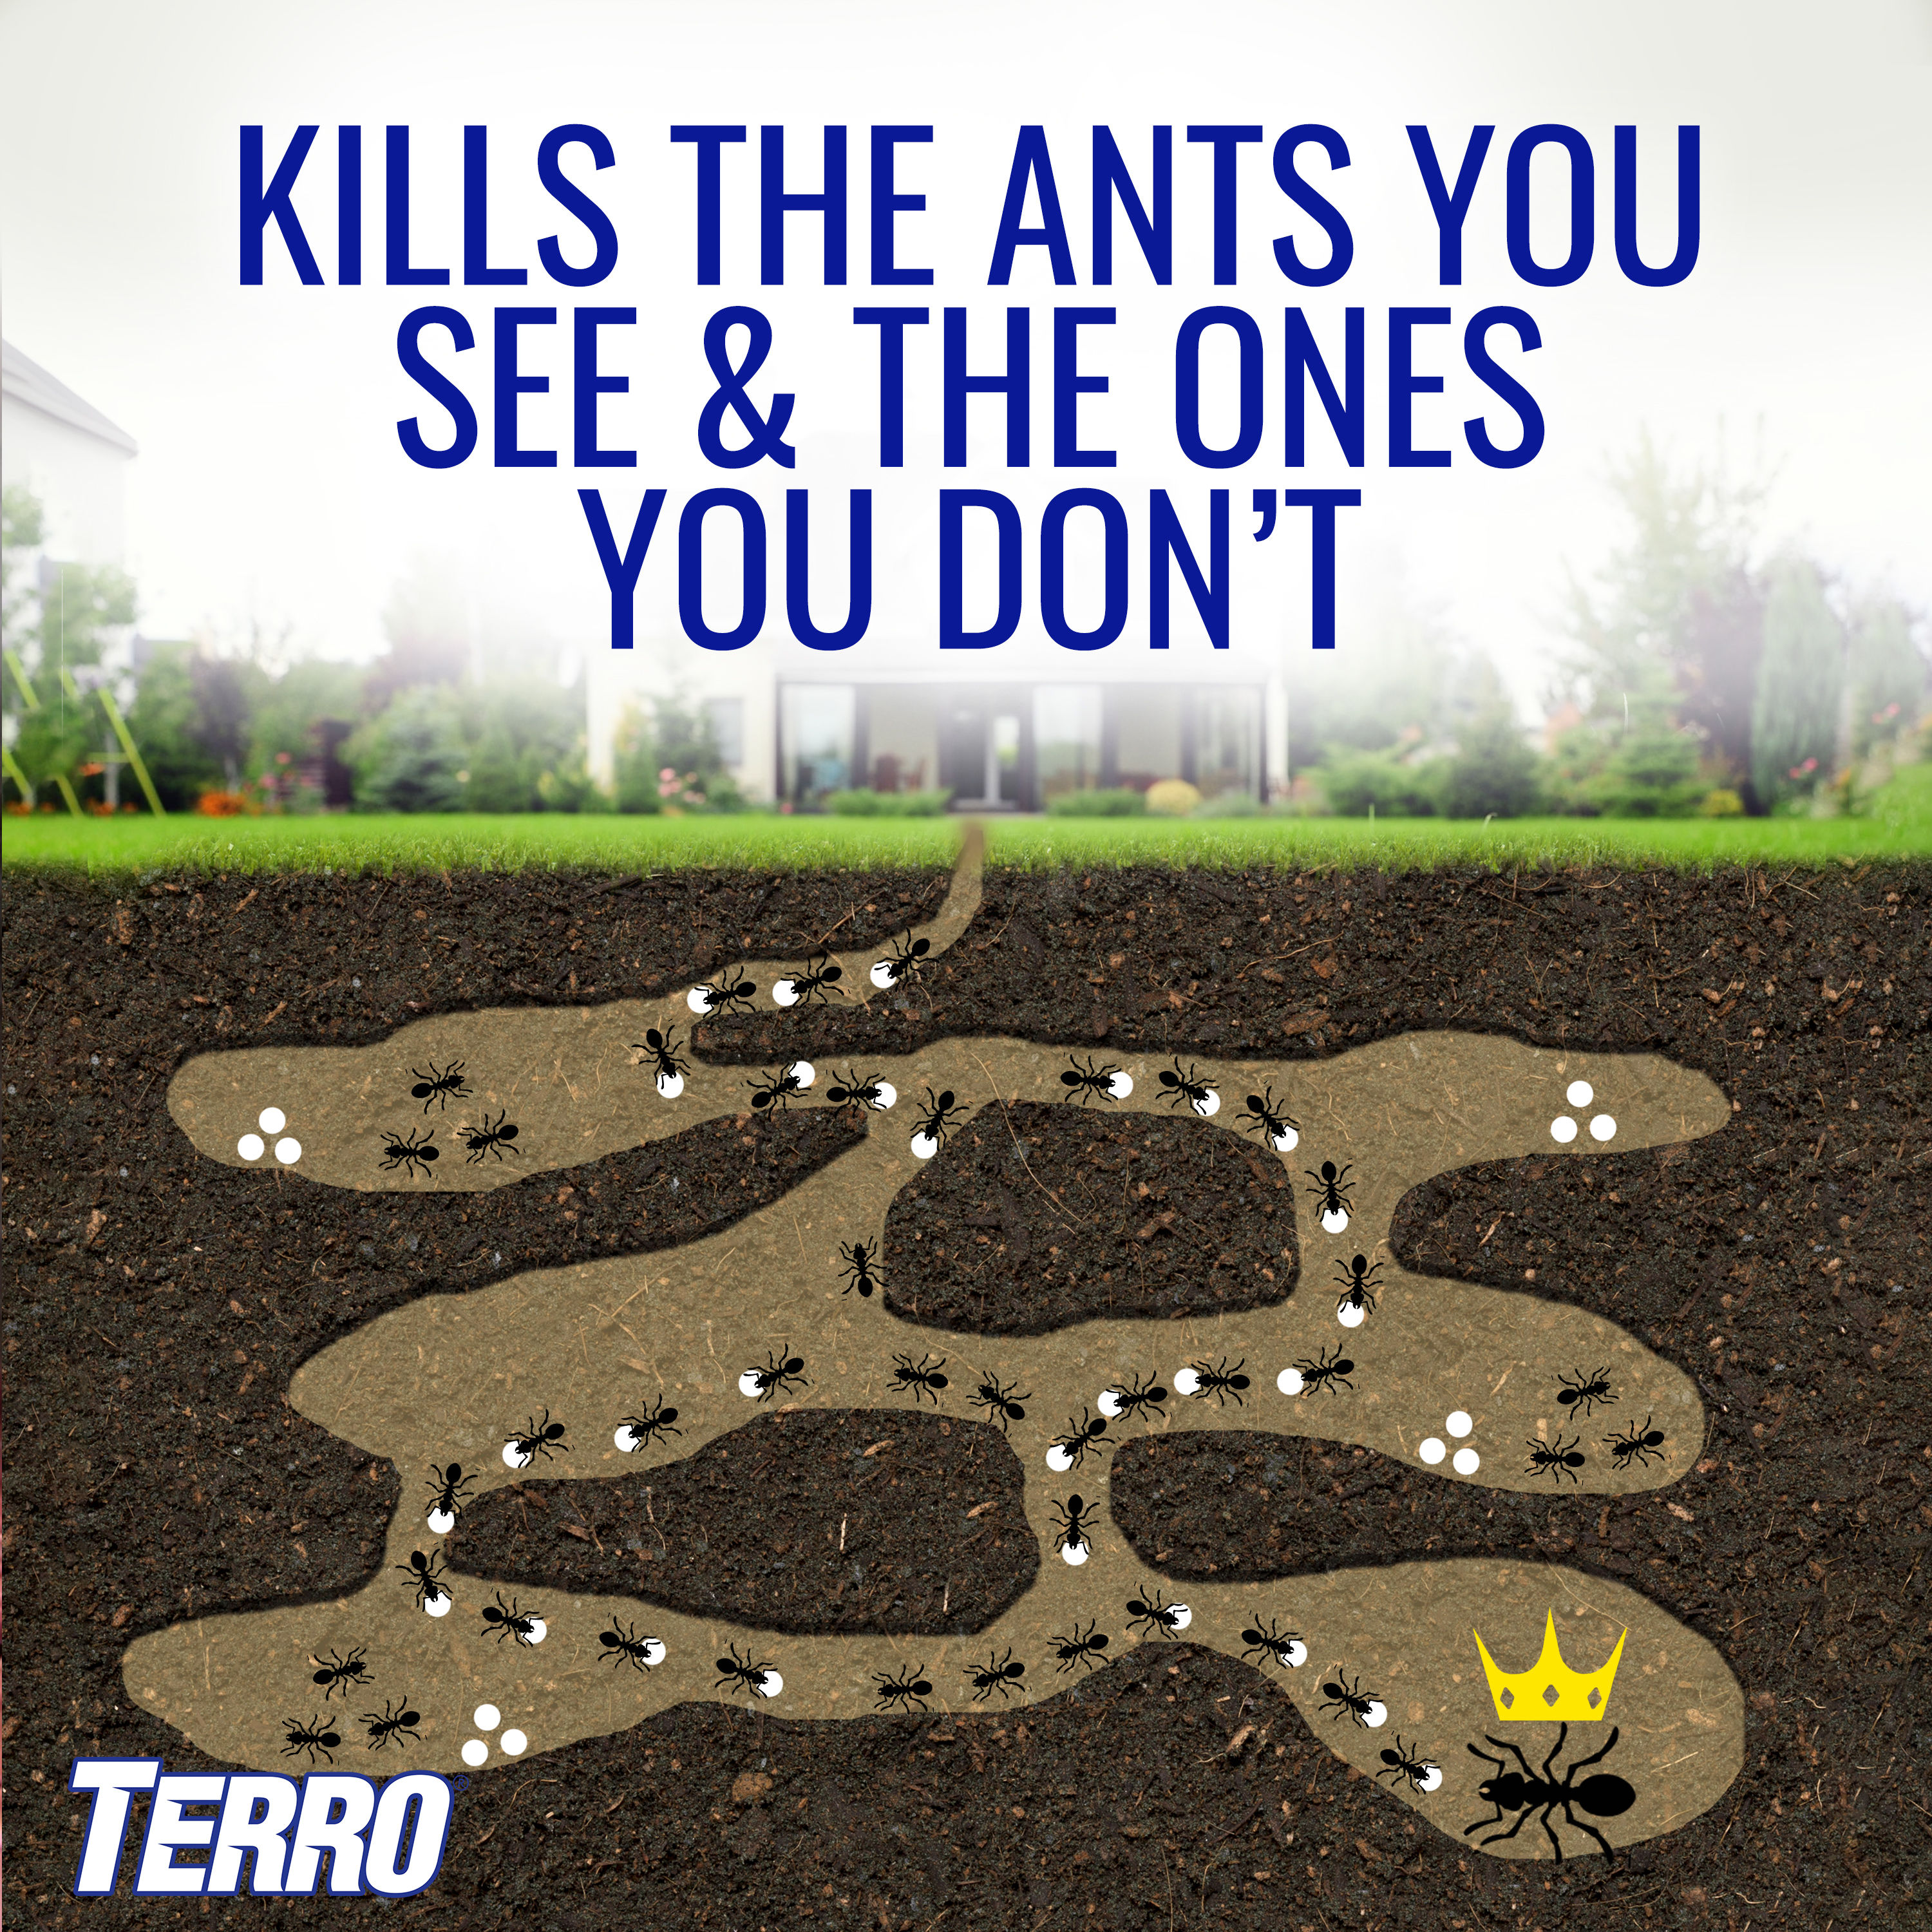 TERRO Outdoor Liquid Ant Bait Station Stakes (8-Pack) in the